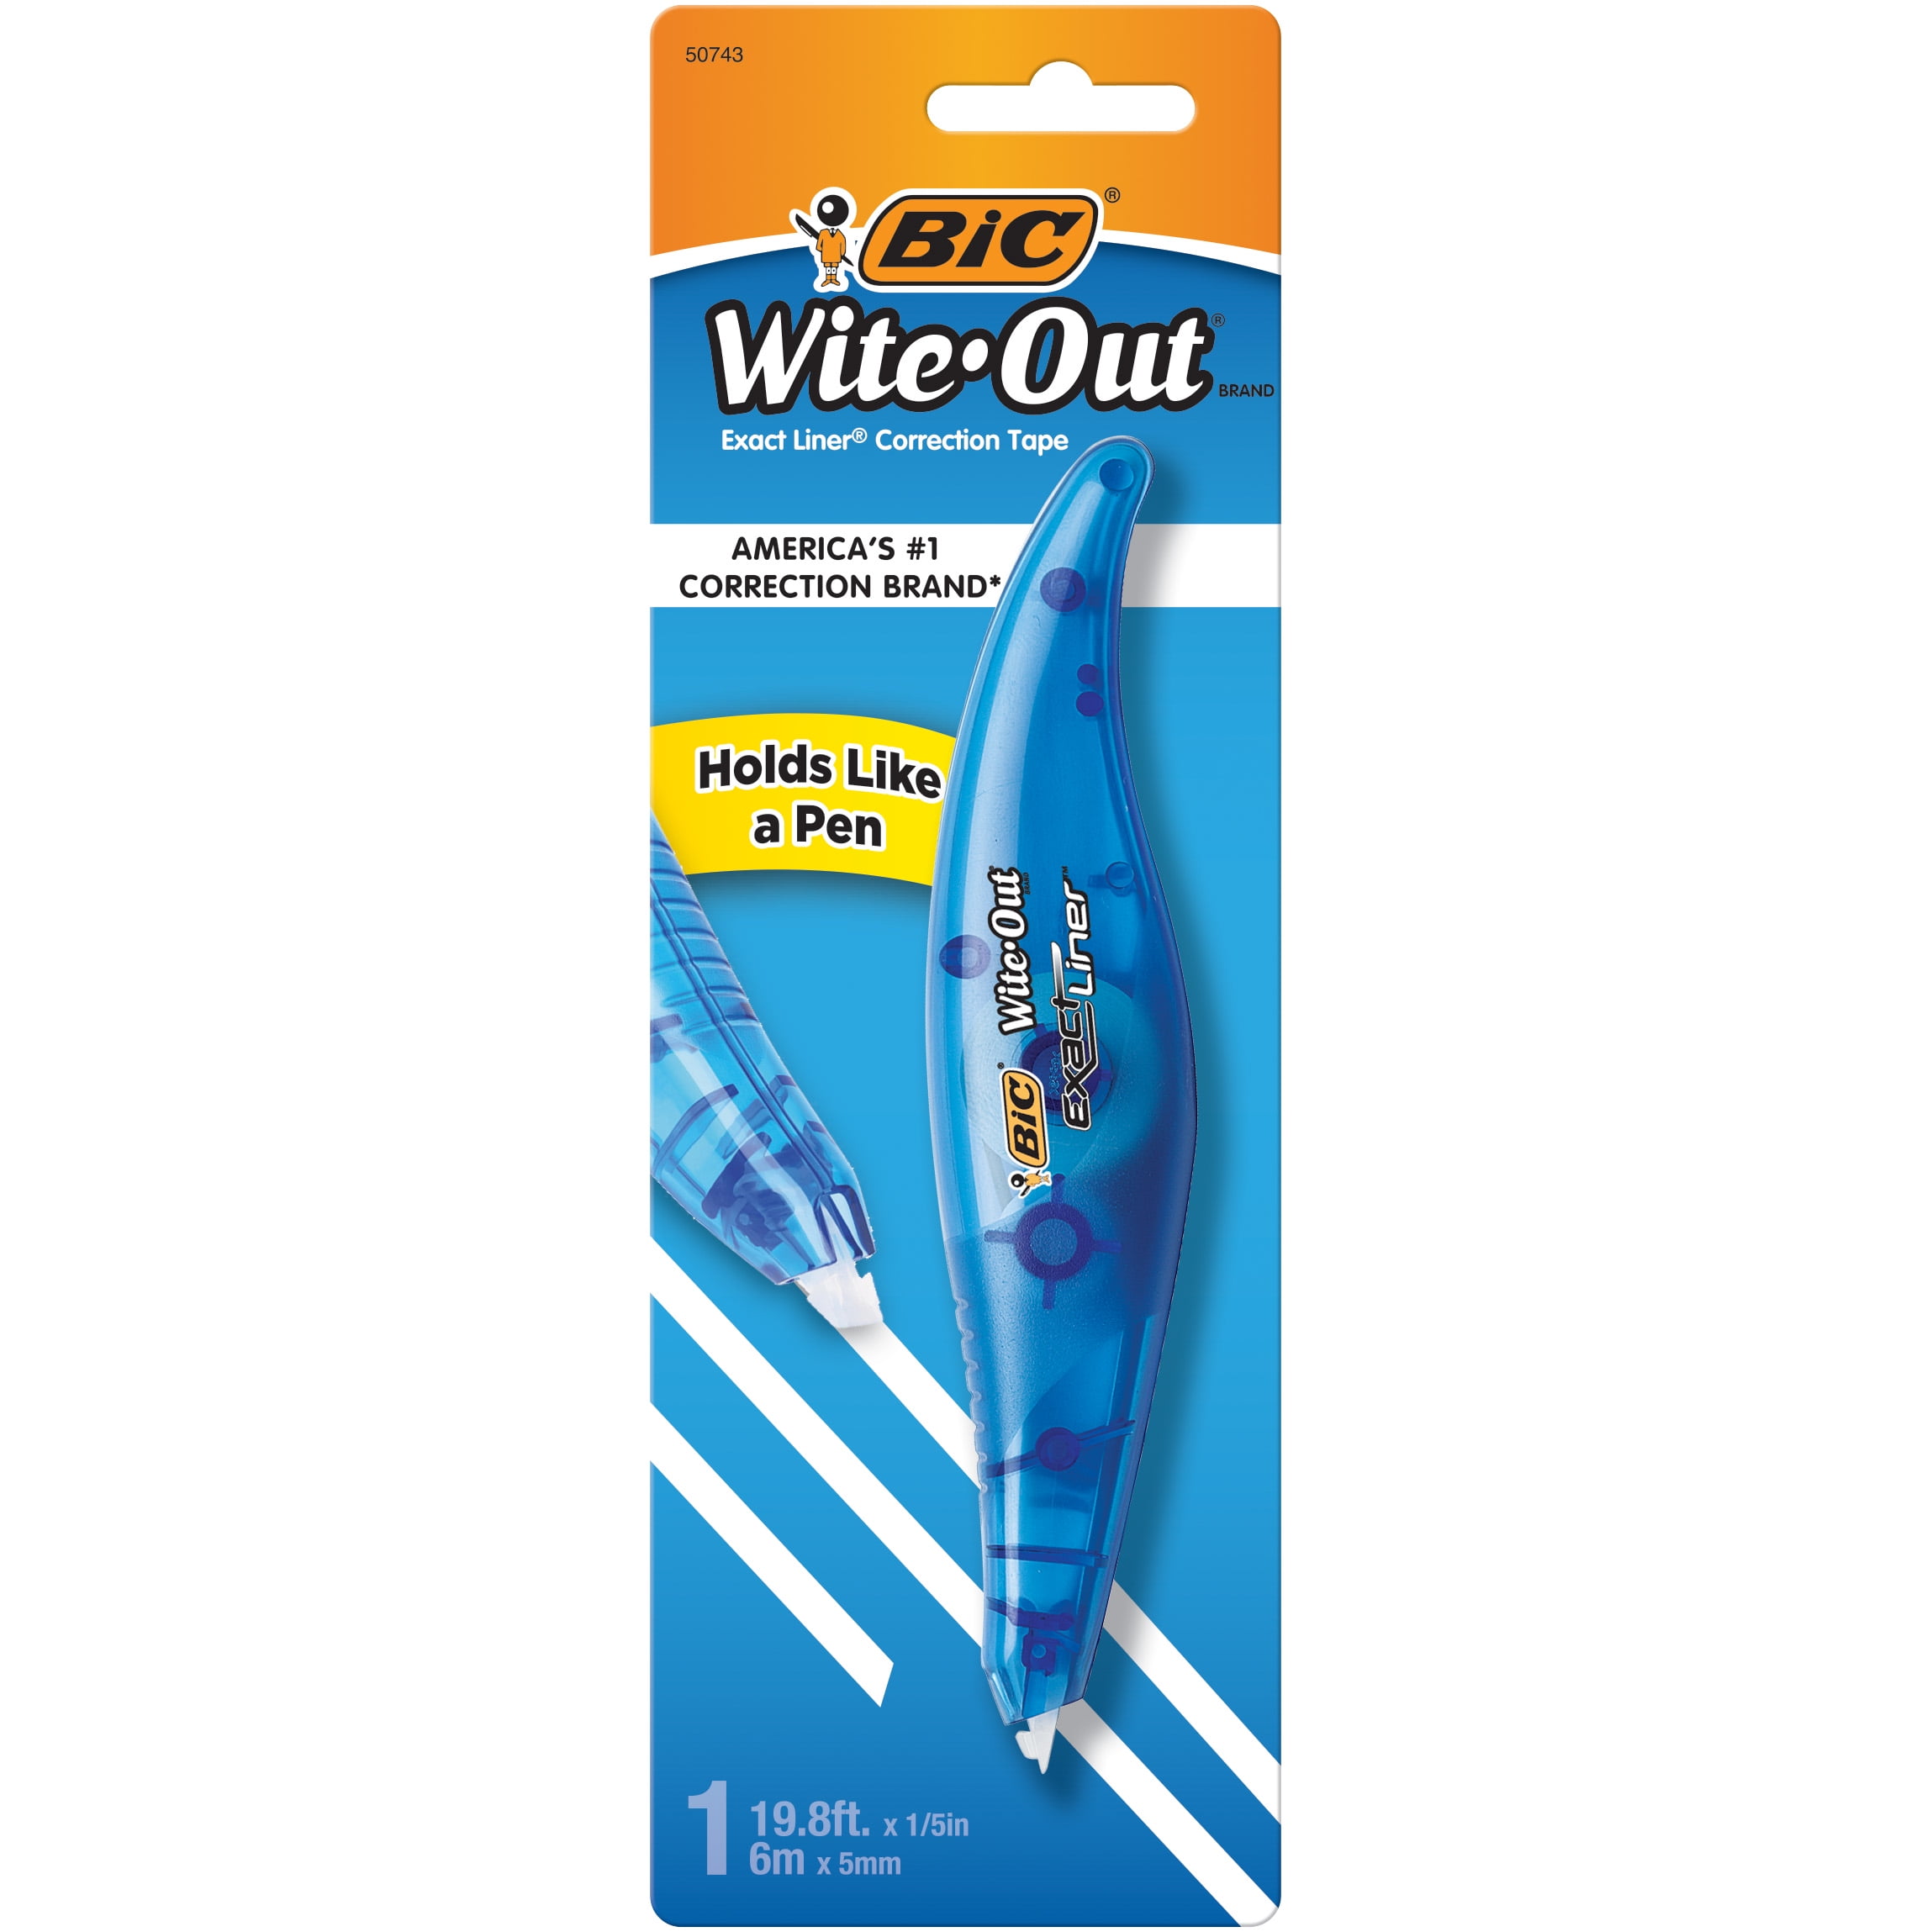 Bic Wite-Out Brand Exact Liner Correction Tape Pen